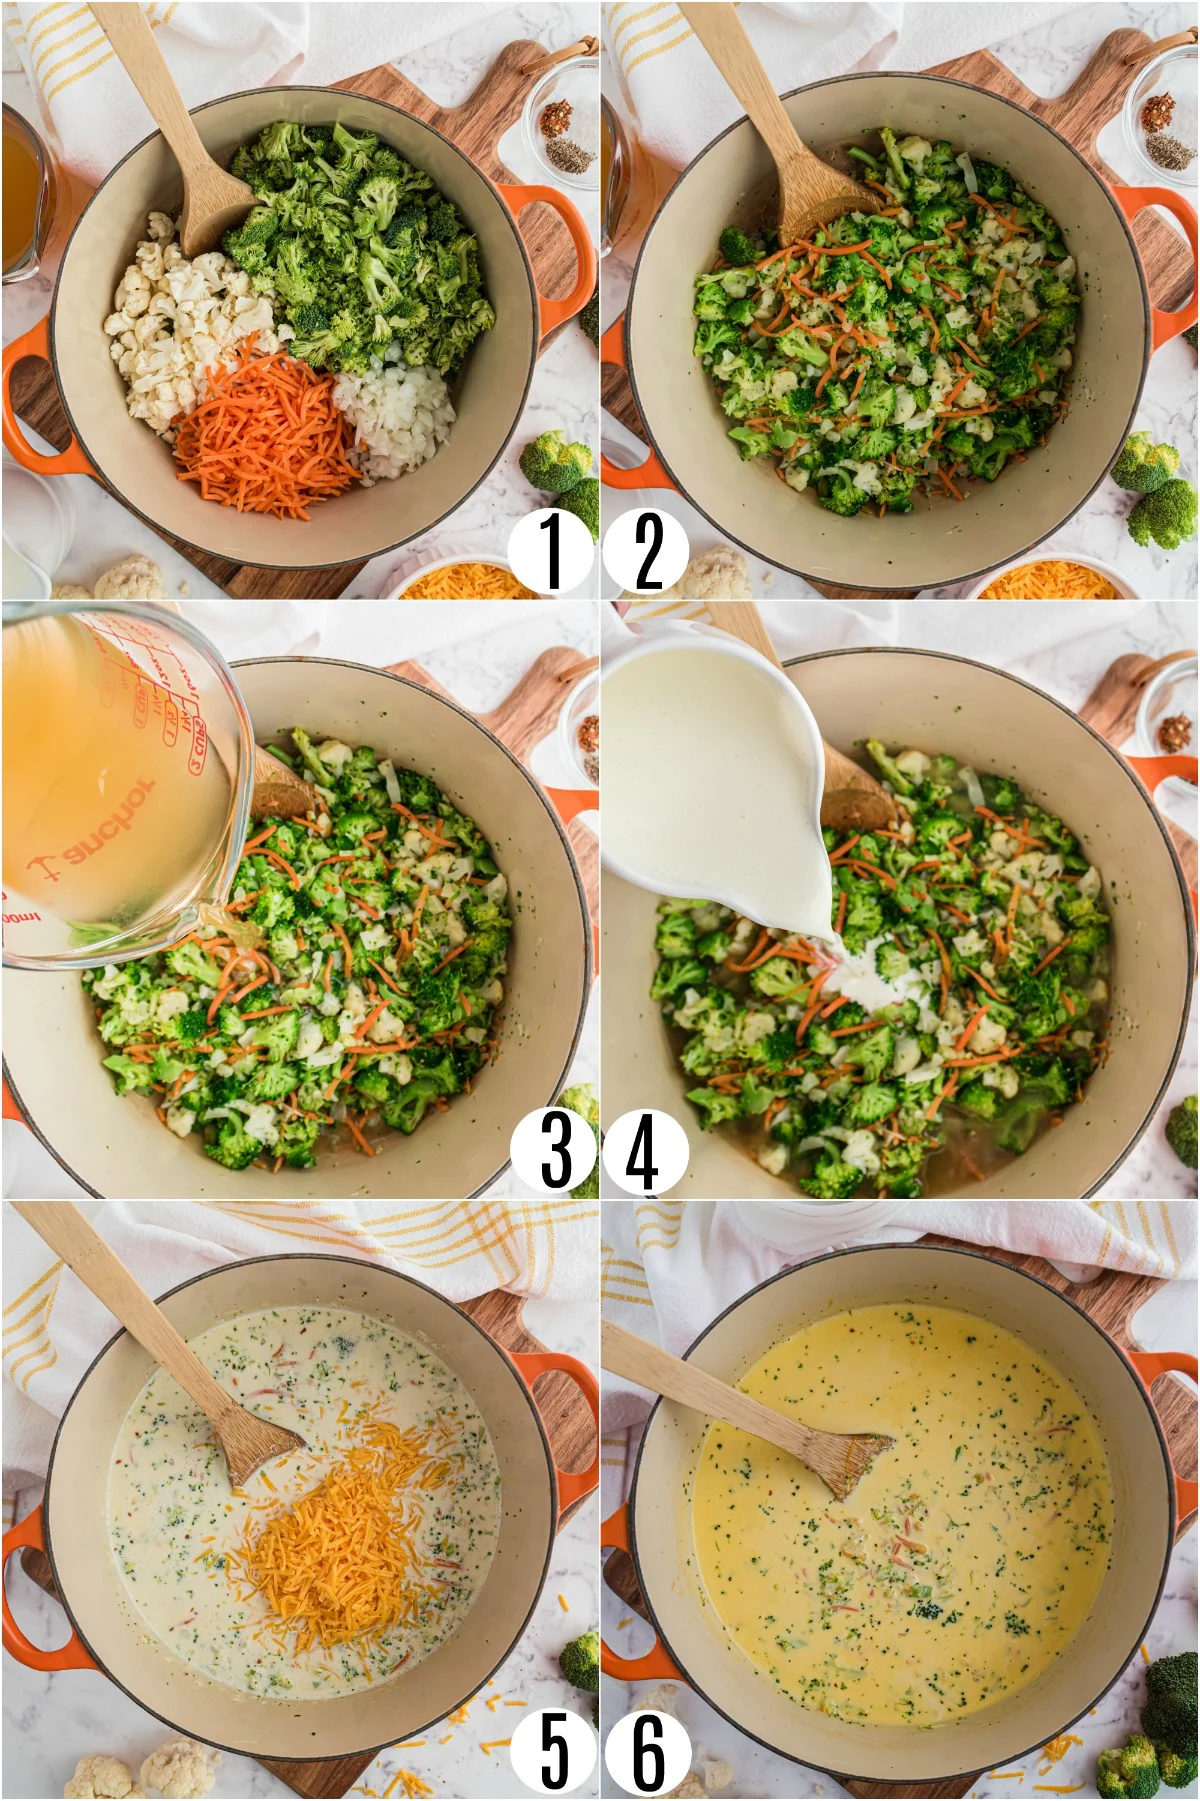 Step by step photos showing how to make low carb broccoli cheese soup.